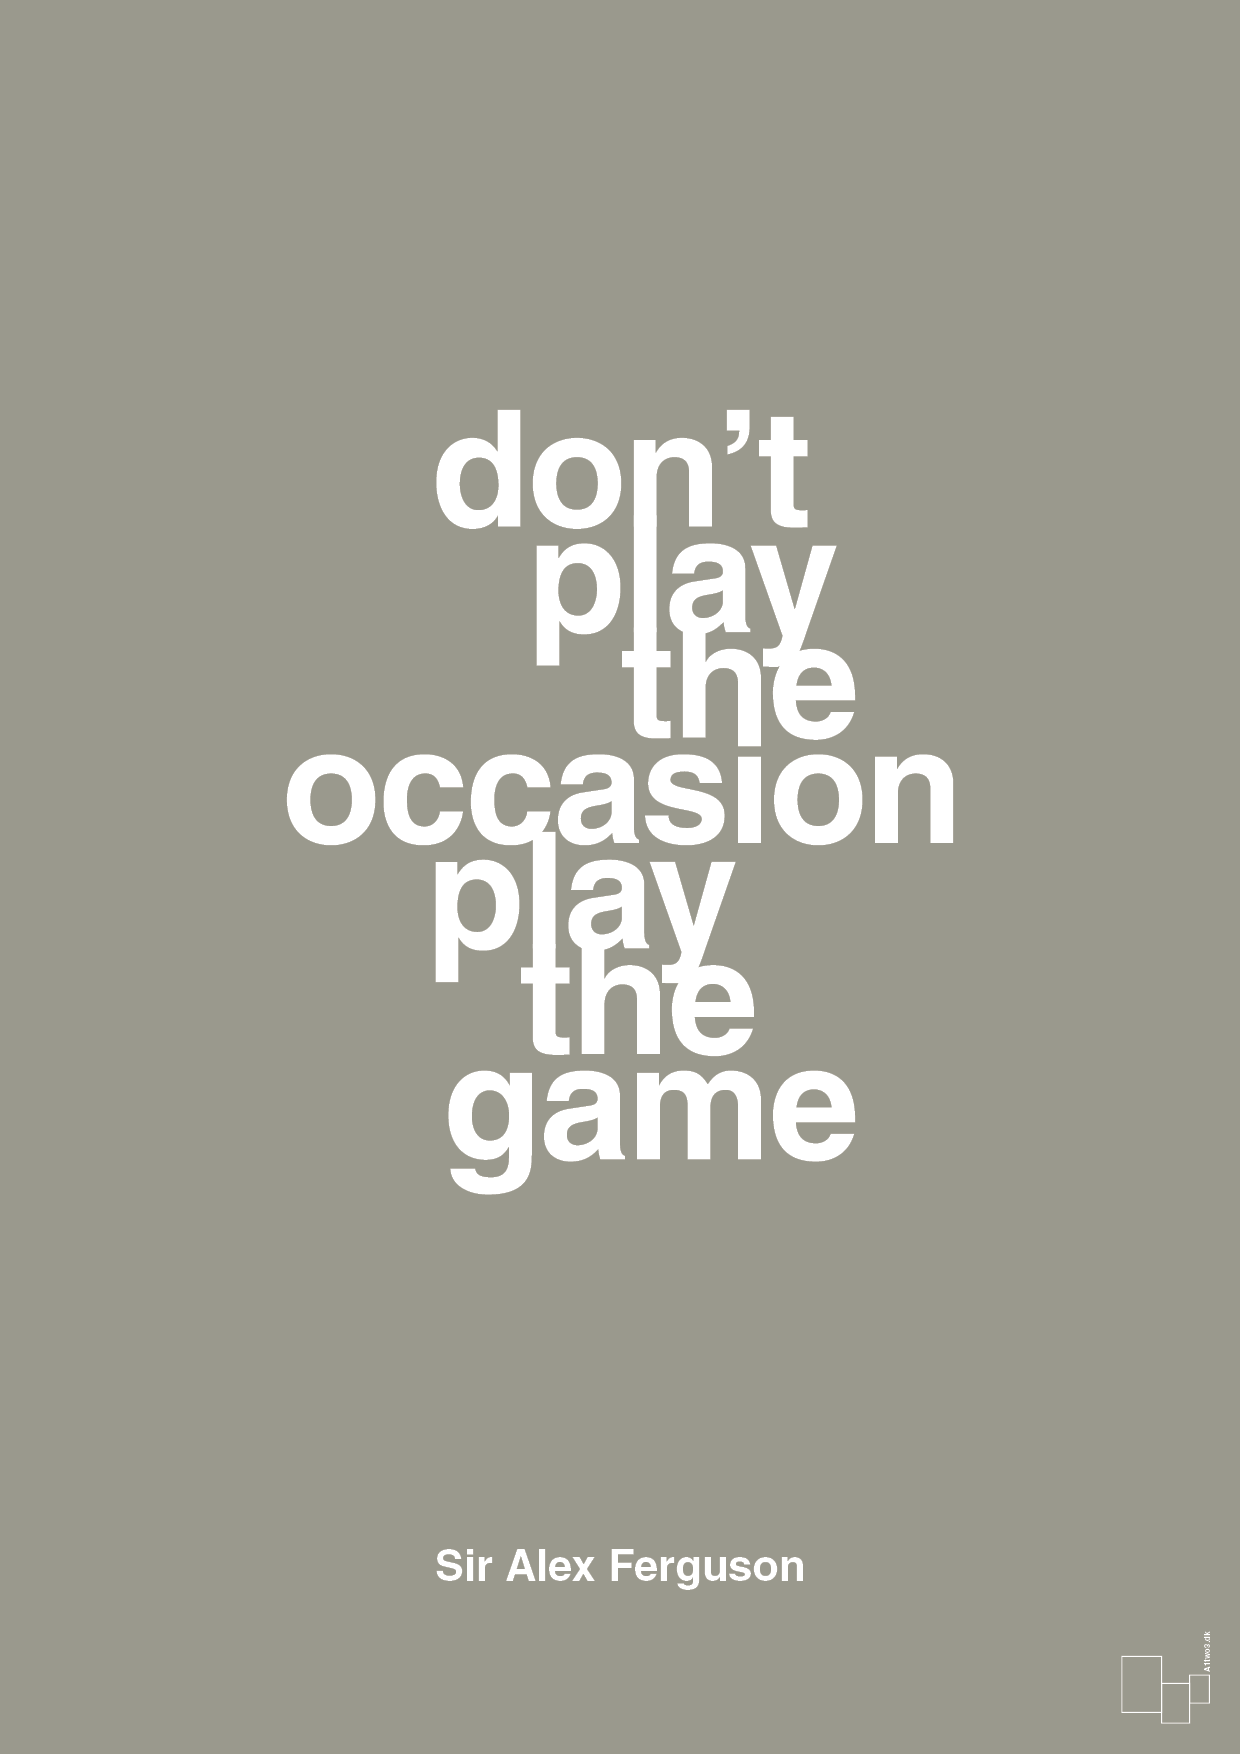 don’t play the occasion play the game - Plakat med Citater i Battleship Gray